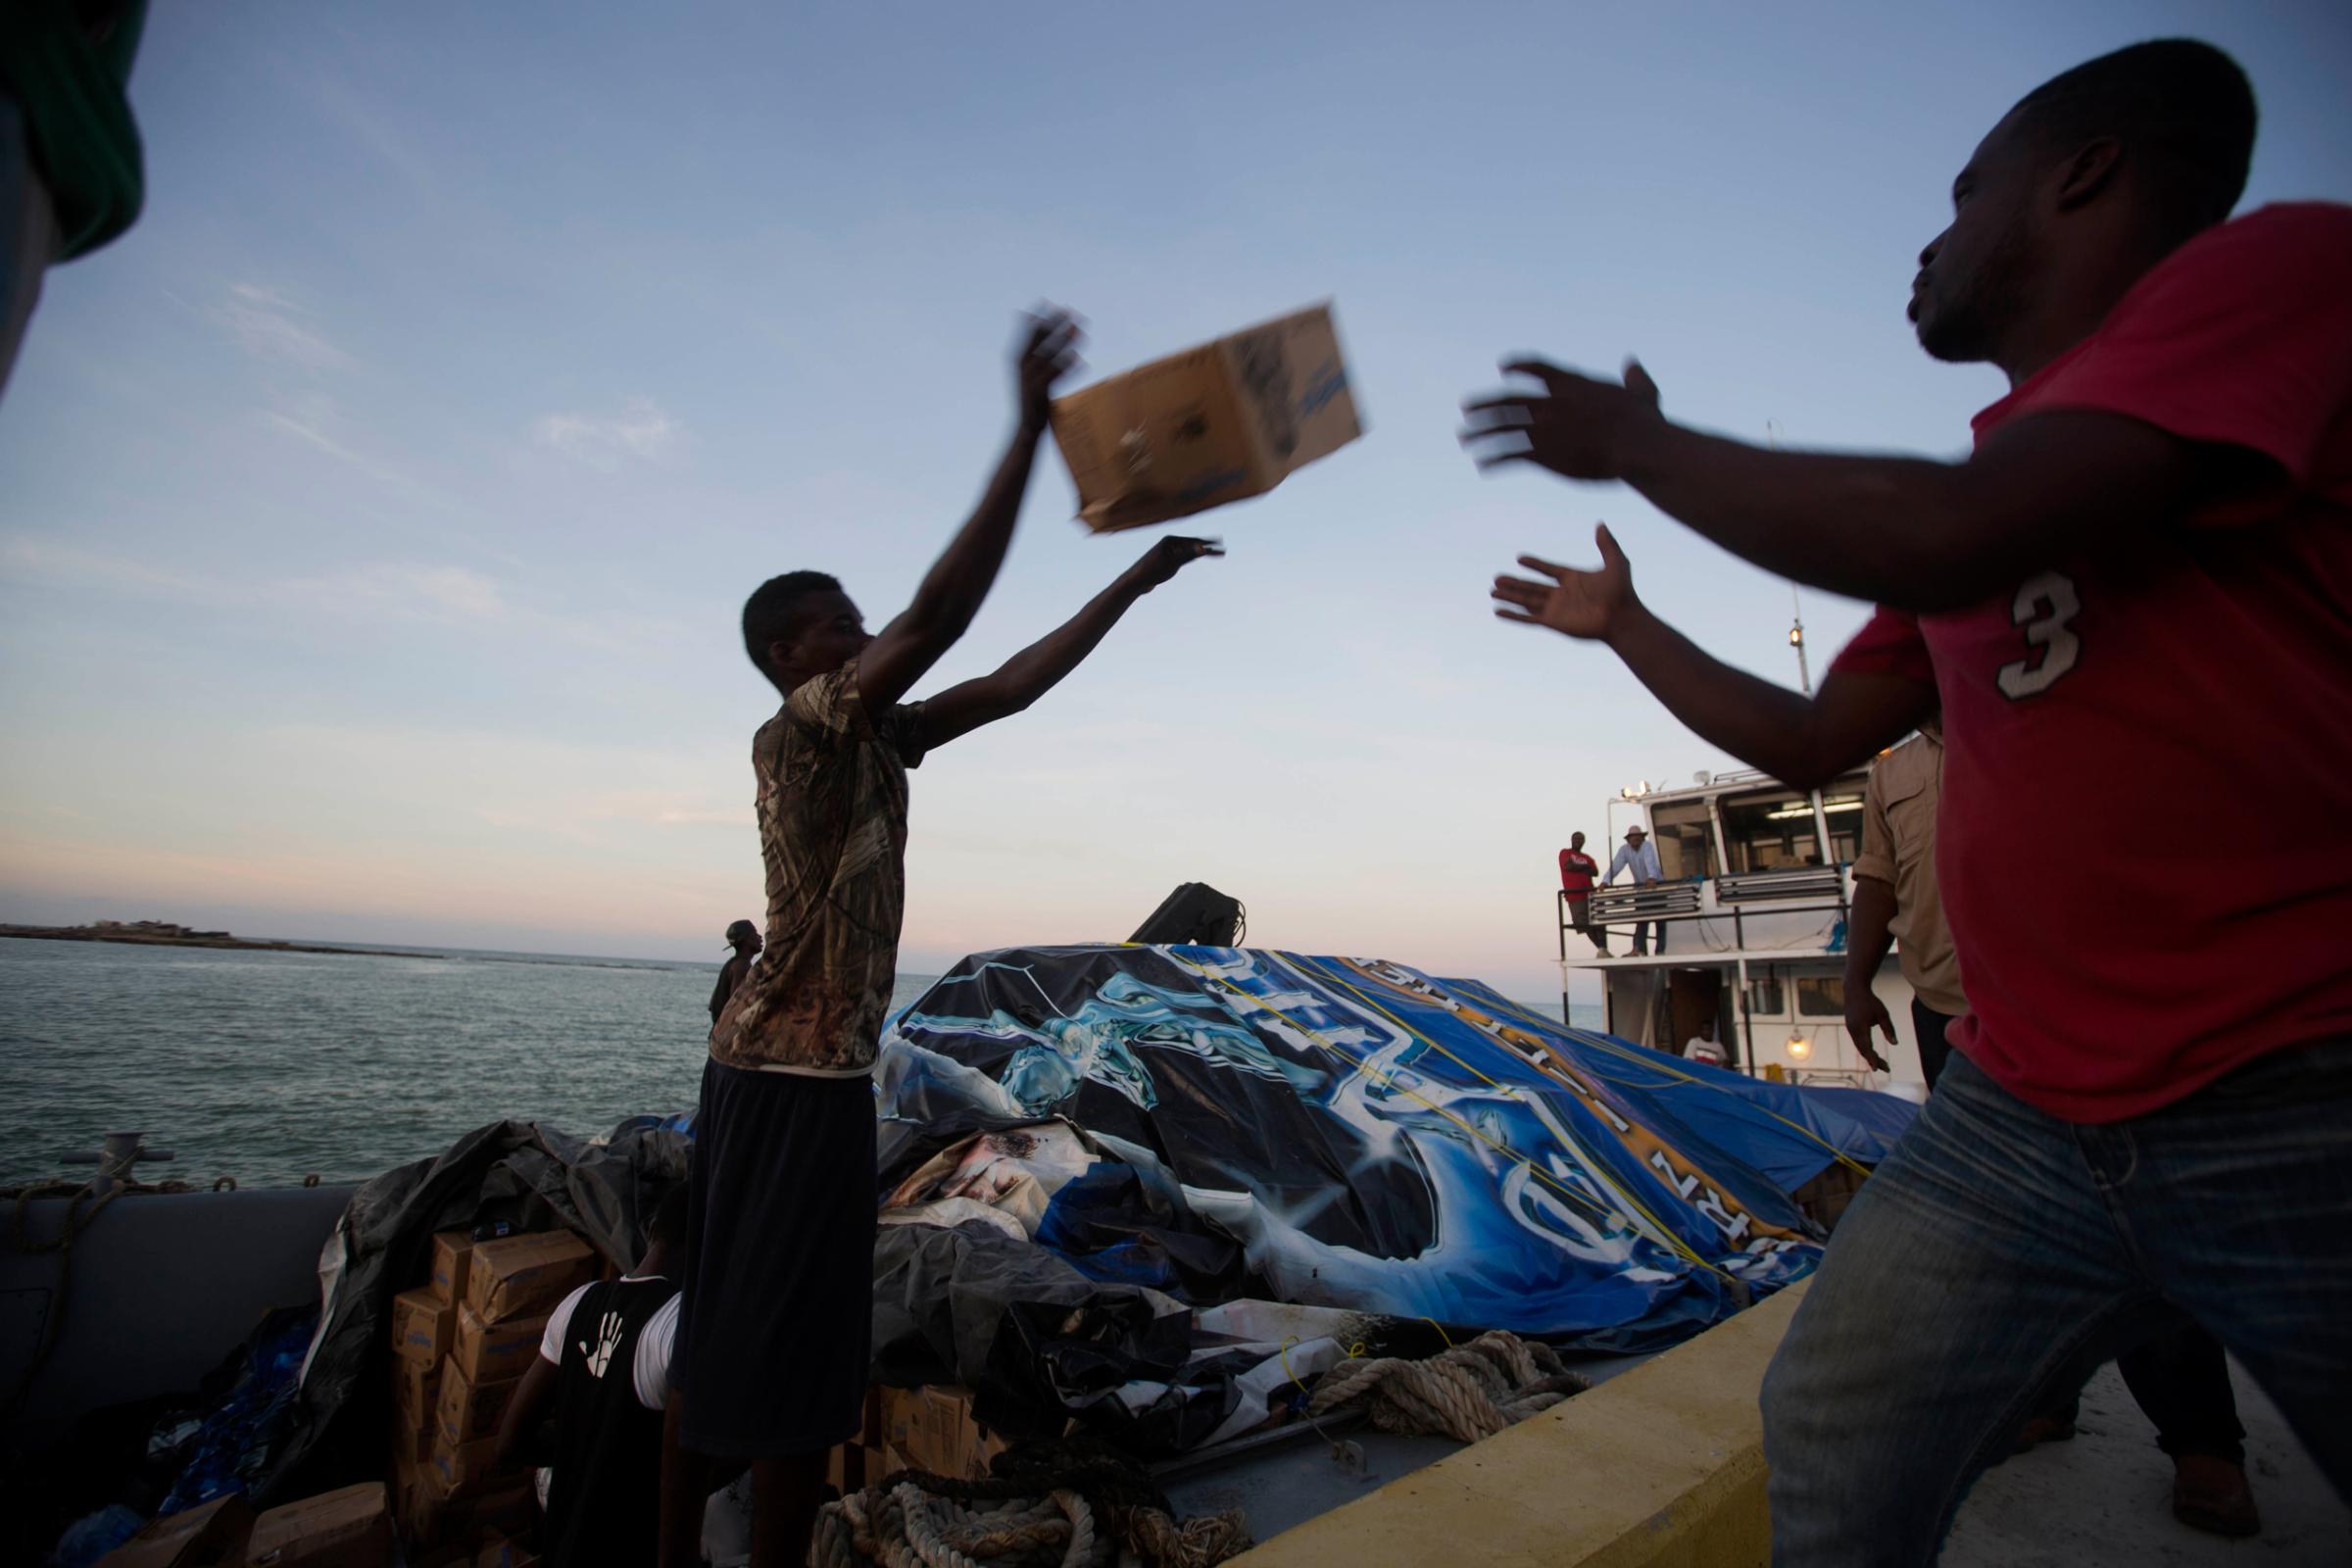 People unload food and water boated in from the "Mission of Hope" charity after Hurricane Matthew swept through Jeremie, Haiti, Saturday, Oct. 8, 2016. Jeremie appears to be the epicenter of the country's growing humanitarian crisis in the wake of the storm. (AP Photo/Dieu Nalio Chery)